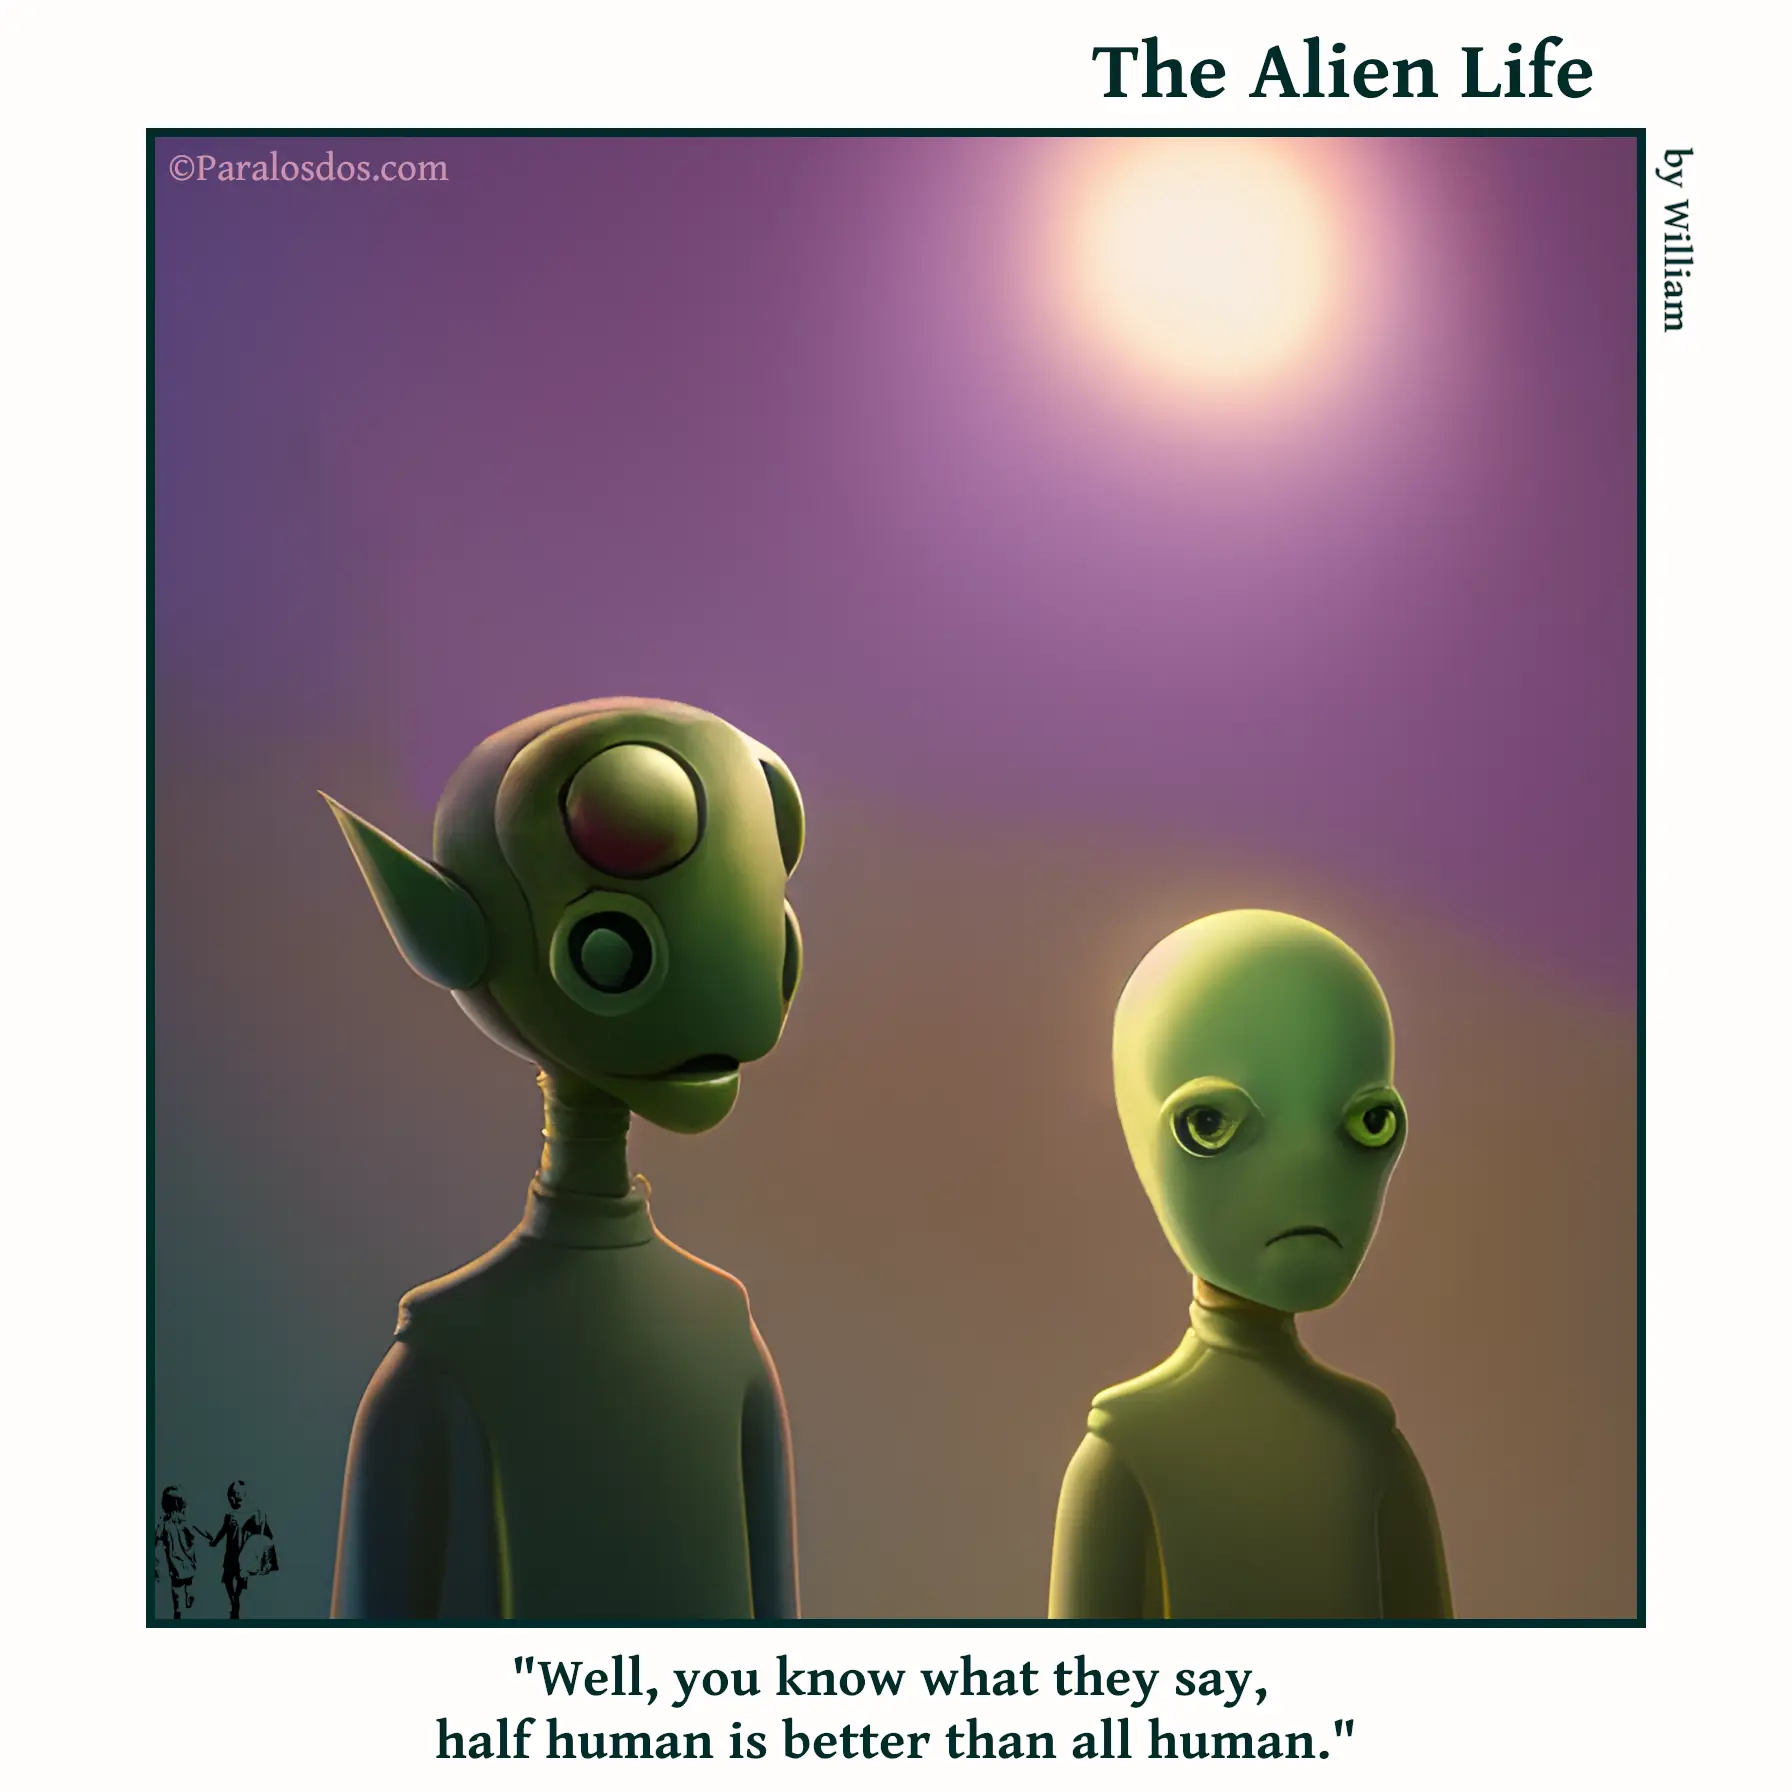 The Alien Life, one panel Comic. Two aliens are walking together, one is weird looking and the other is clearly part human. The caption reads: "Well, you know what they say, half human is better than all human."